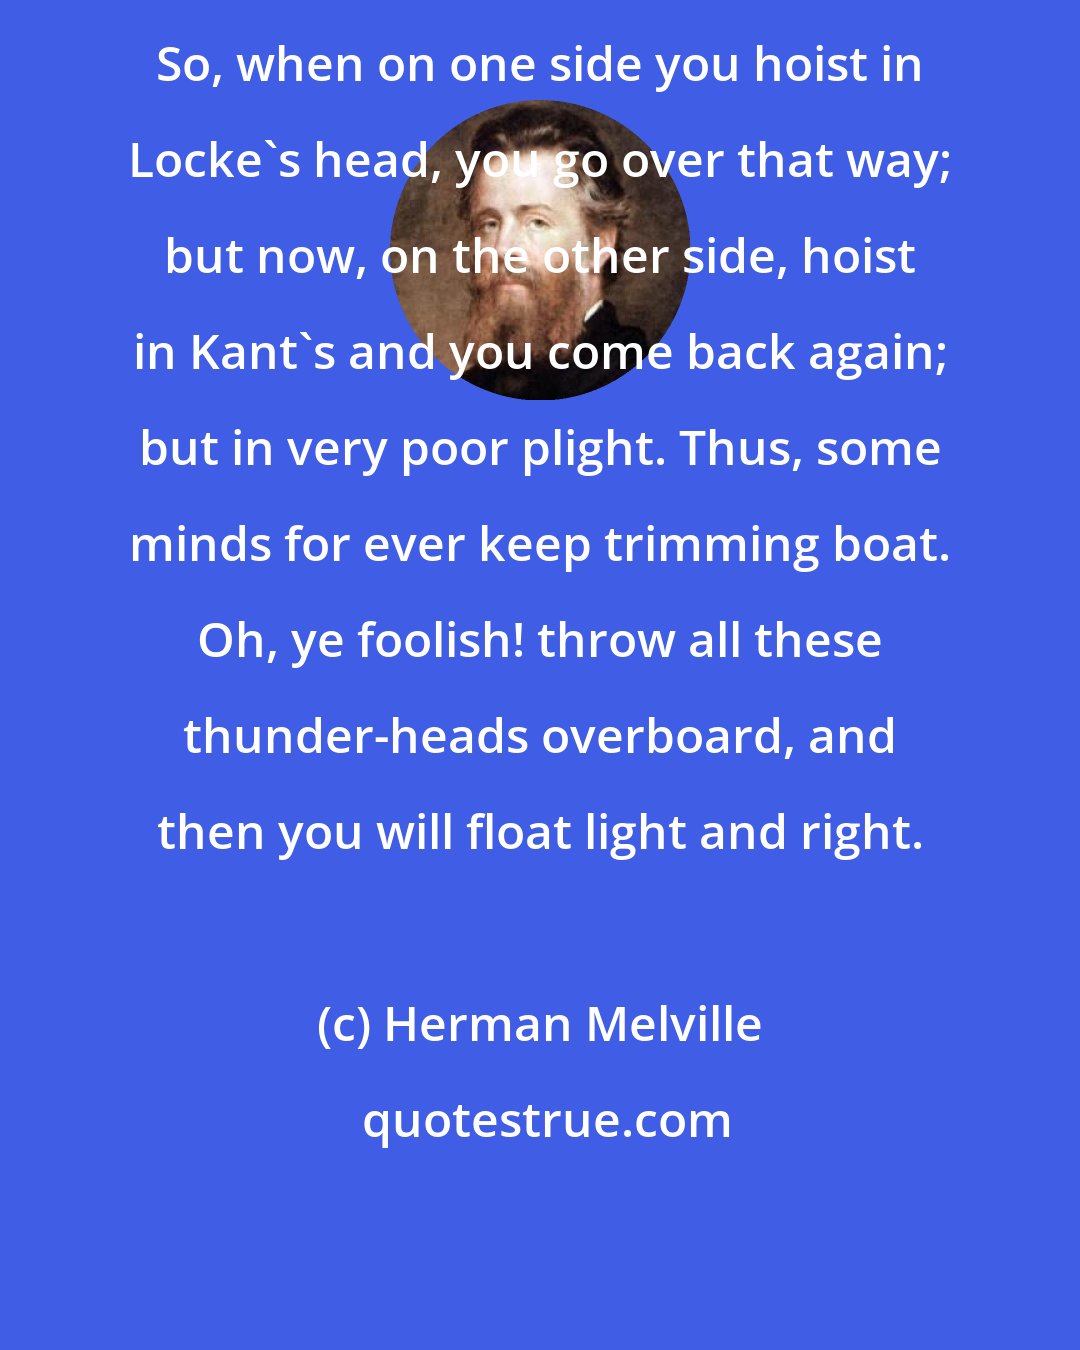 Herman Melville: So, when on one side you hoist in Locke's head, you go over that way; but now, on the other side, hoist in Kant's and you come back again; but in very poor plight. Thus, some minds for ever keep trimming boat. Oh, ye foolish! throw all these thunder-heads overboard, and then you will float light and right.